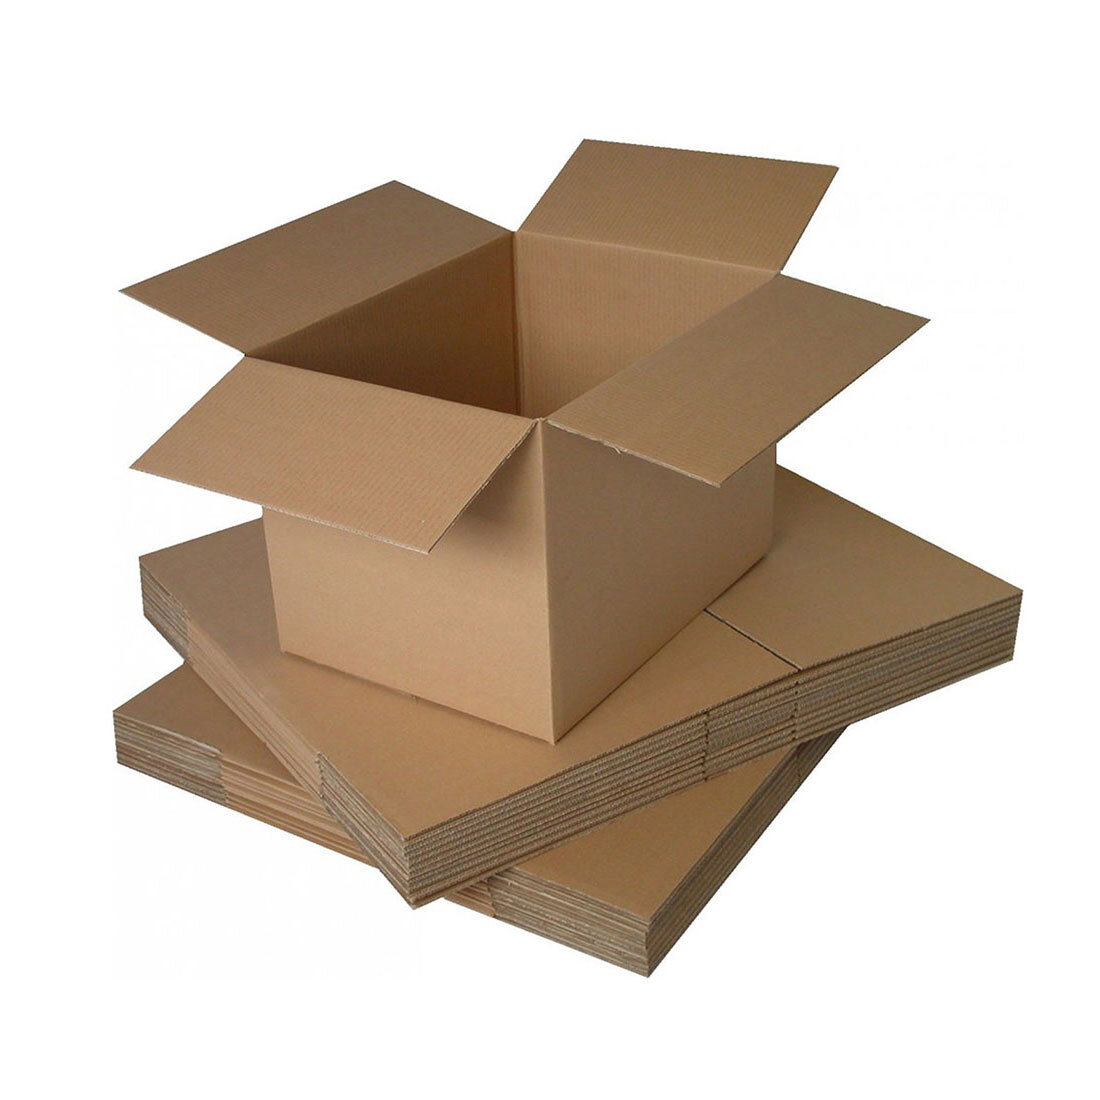 25 18" X 12" X 10" Packing Moving Shipping Cardboard Corrugated Boxes Cartons 